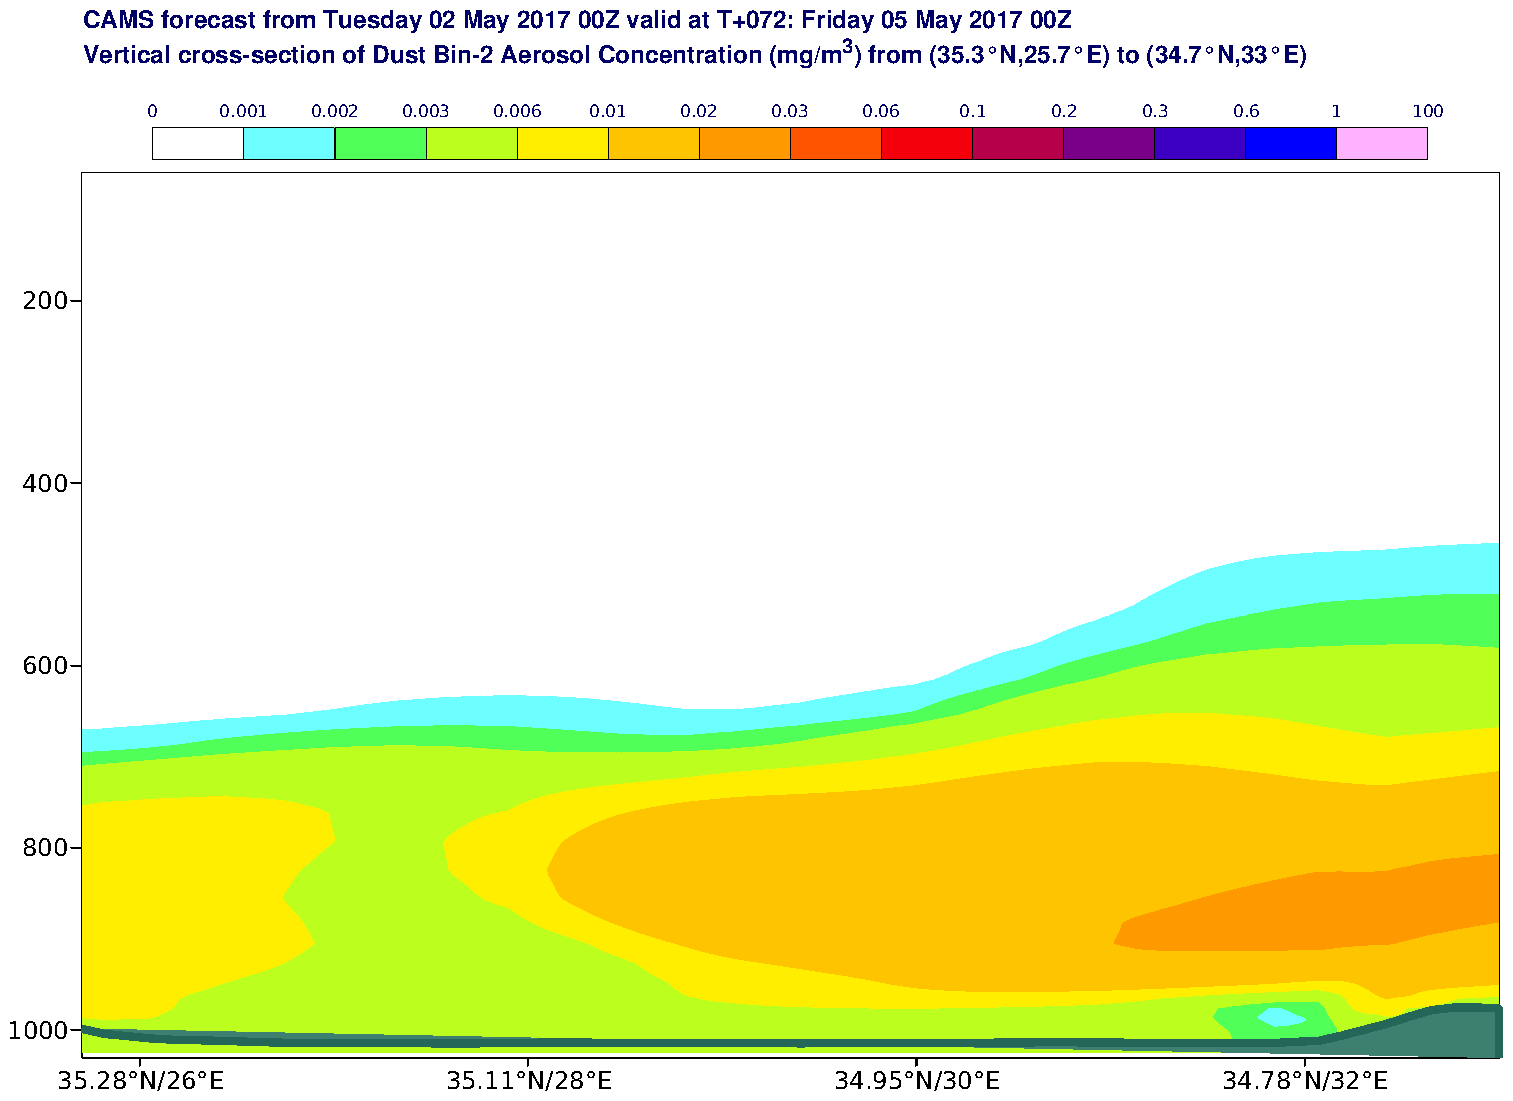 Vertical cross-section of Dust Bin-2 Aerosol Concentration (mg/m3) valid at T72 - 2017-05-05 00:00